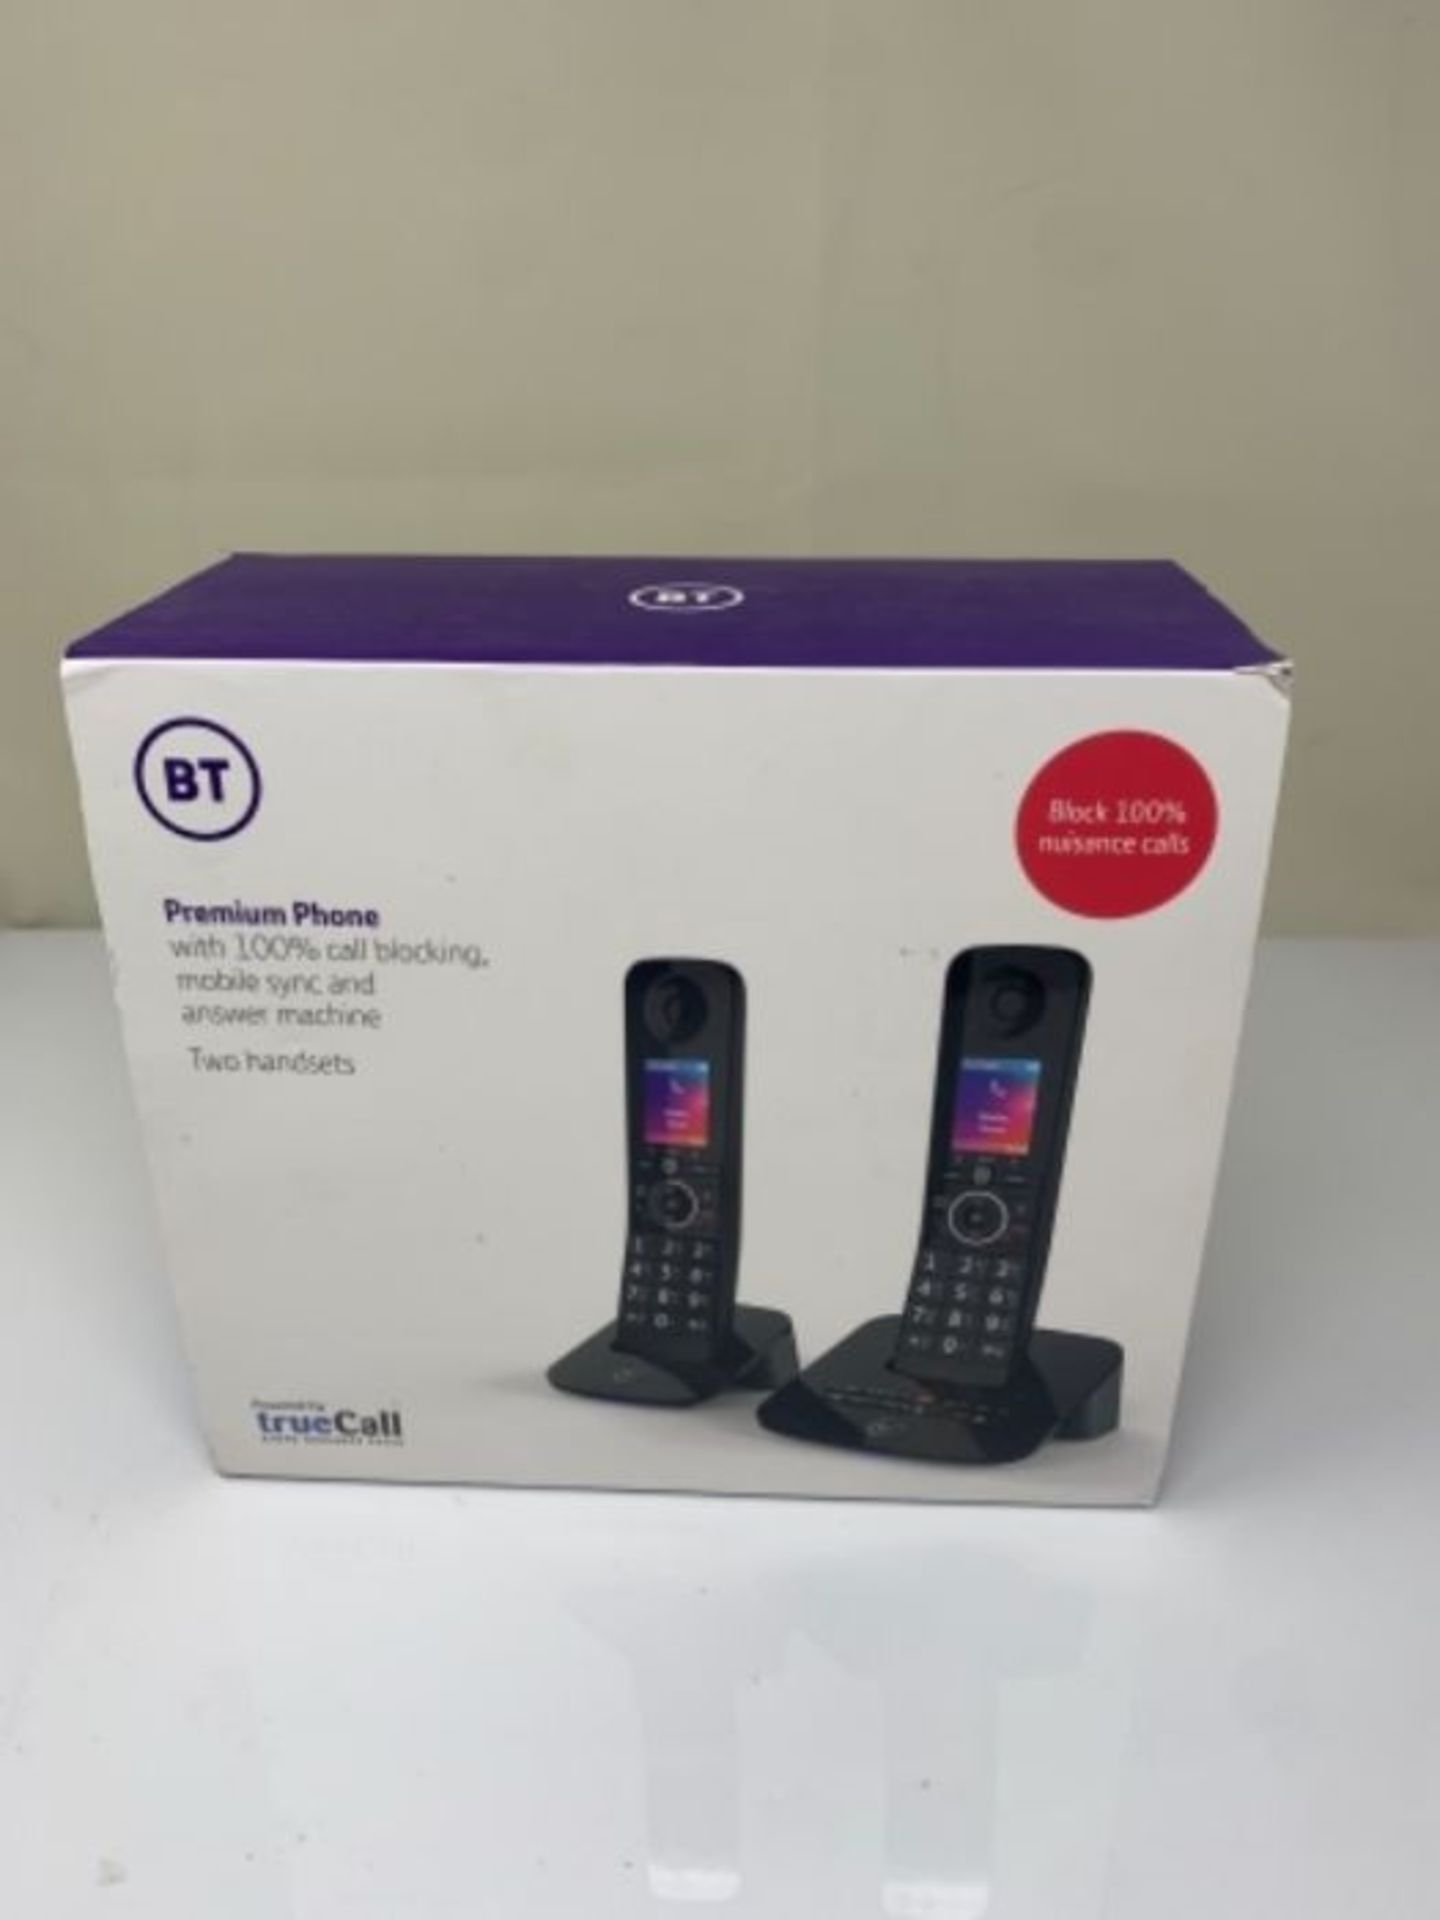 RRP £80.00 BT Premium Cordless Home Phone with 100% Nuisance Call Blocking, Mobile sync and Answe - Image 2 of 3